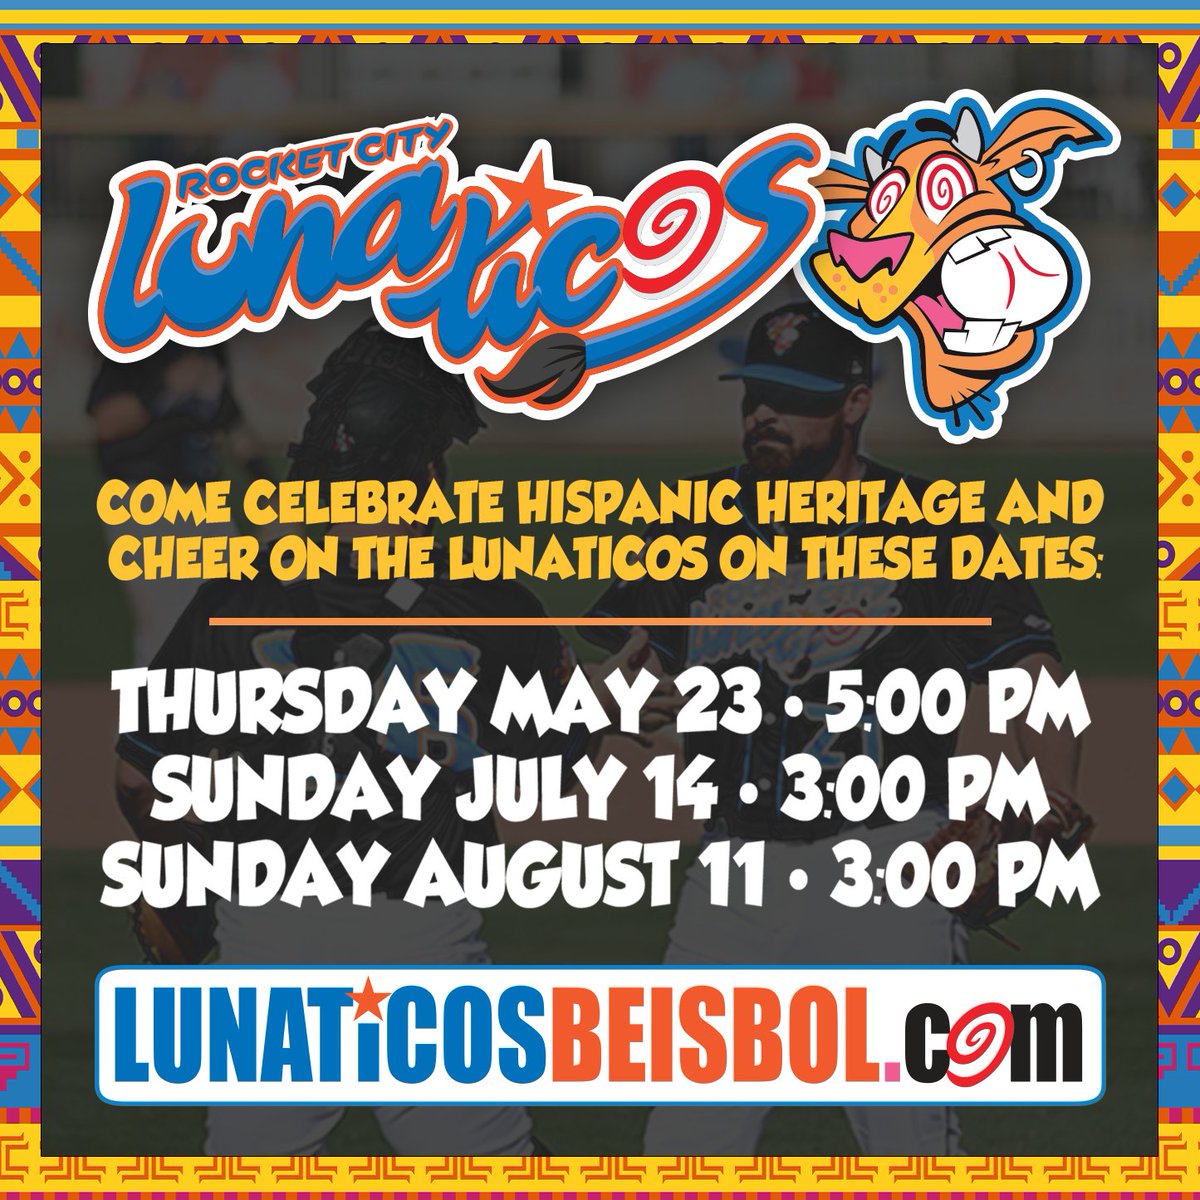 The Lunaticos de Rocket City return in one week as part of @MiLB's #CopadelaDiversión initiative! We'll have a @milagrotequila Yard Mug giveaway for the first 1,500 fans 21+, which includes $5 margarita fill-ups all game long! lunaticosbeisbol.com